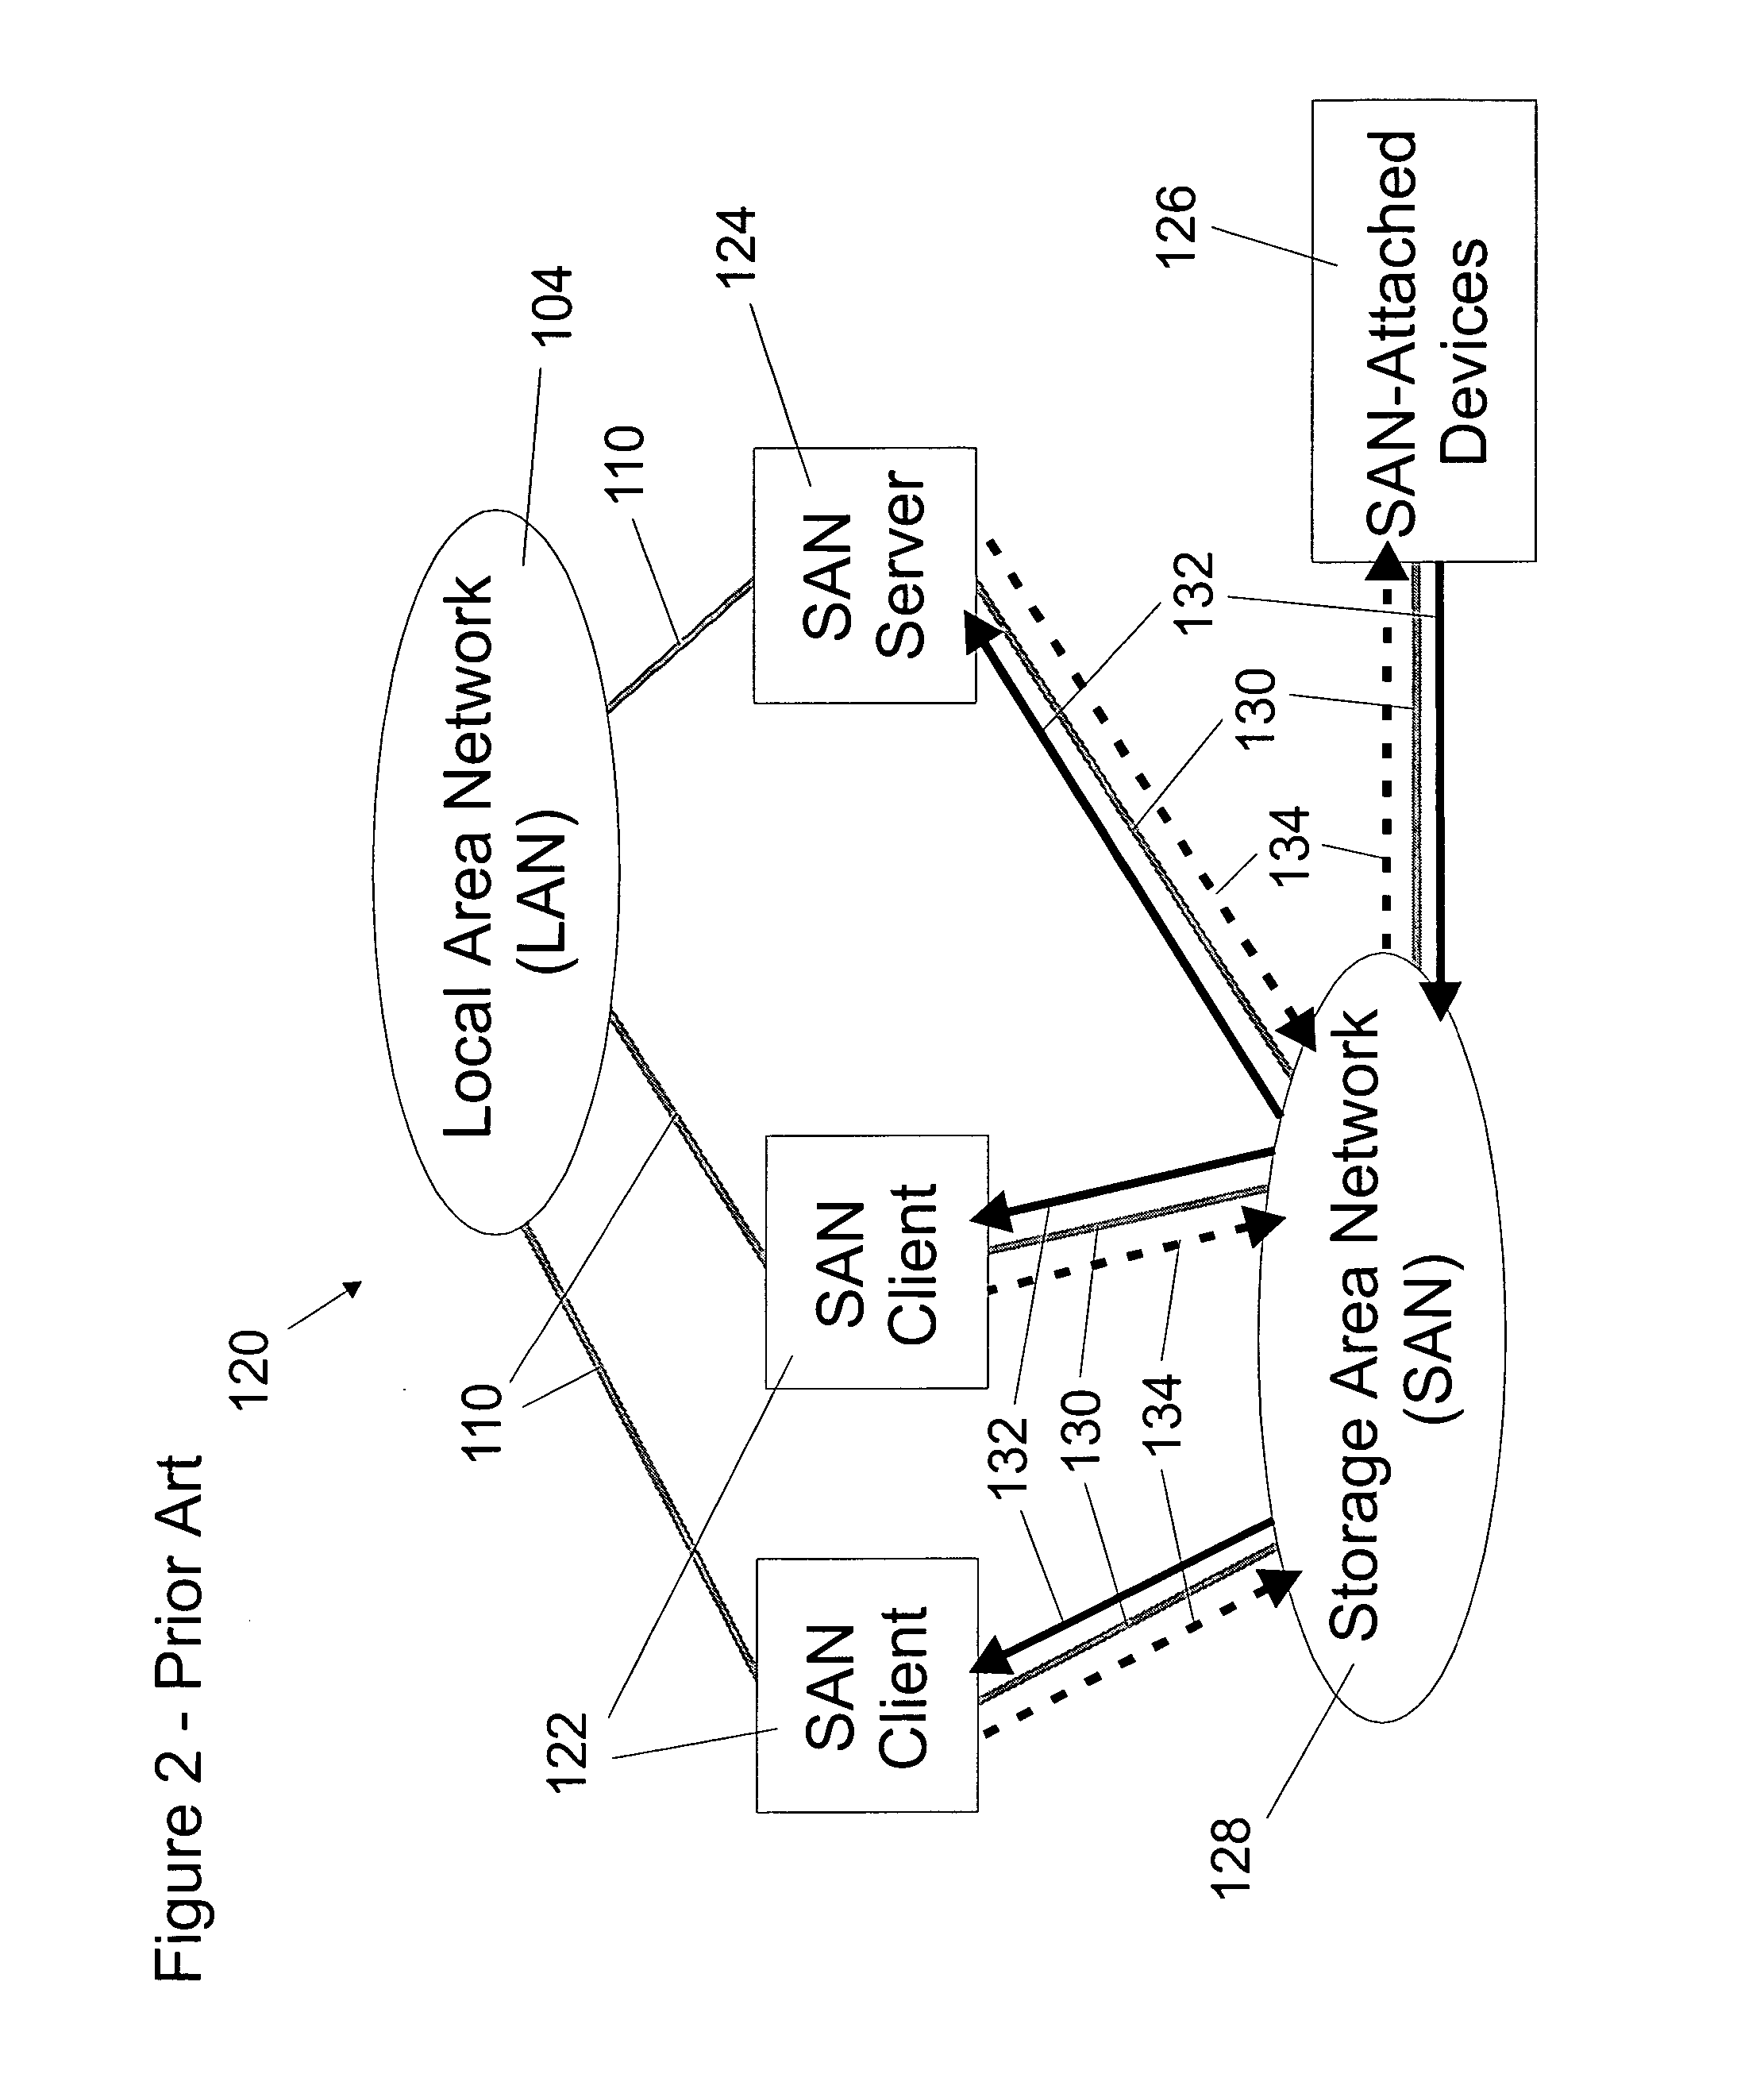 Storage area network file system